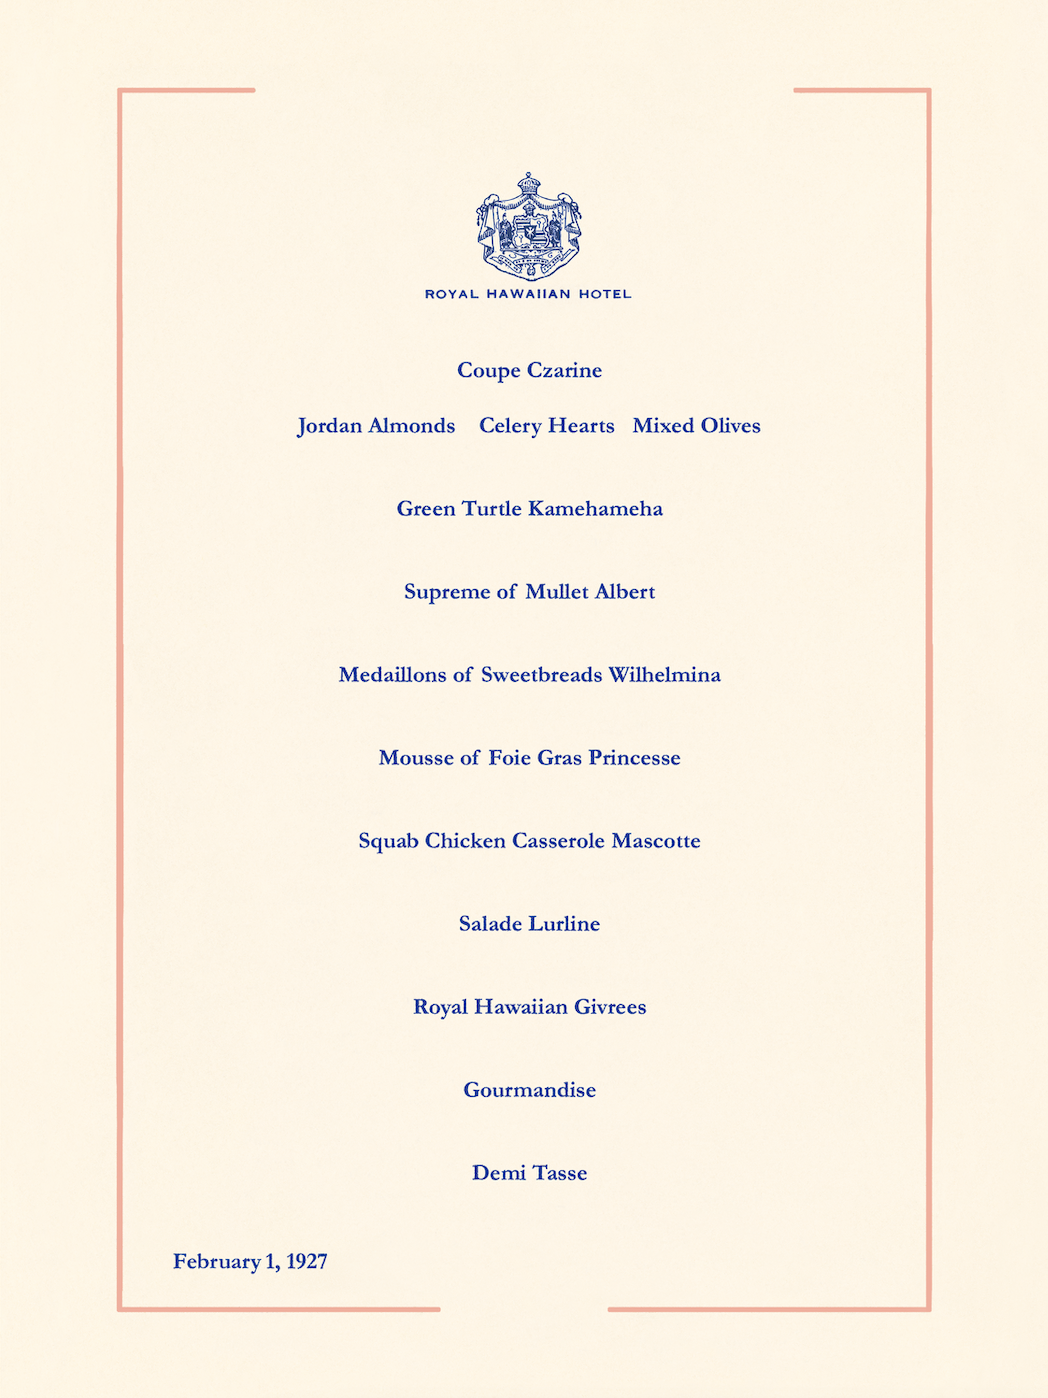 Menu featuring an off-white background and blue text of the menu items for the Royal Hawaiian Hotel.